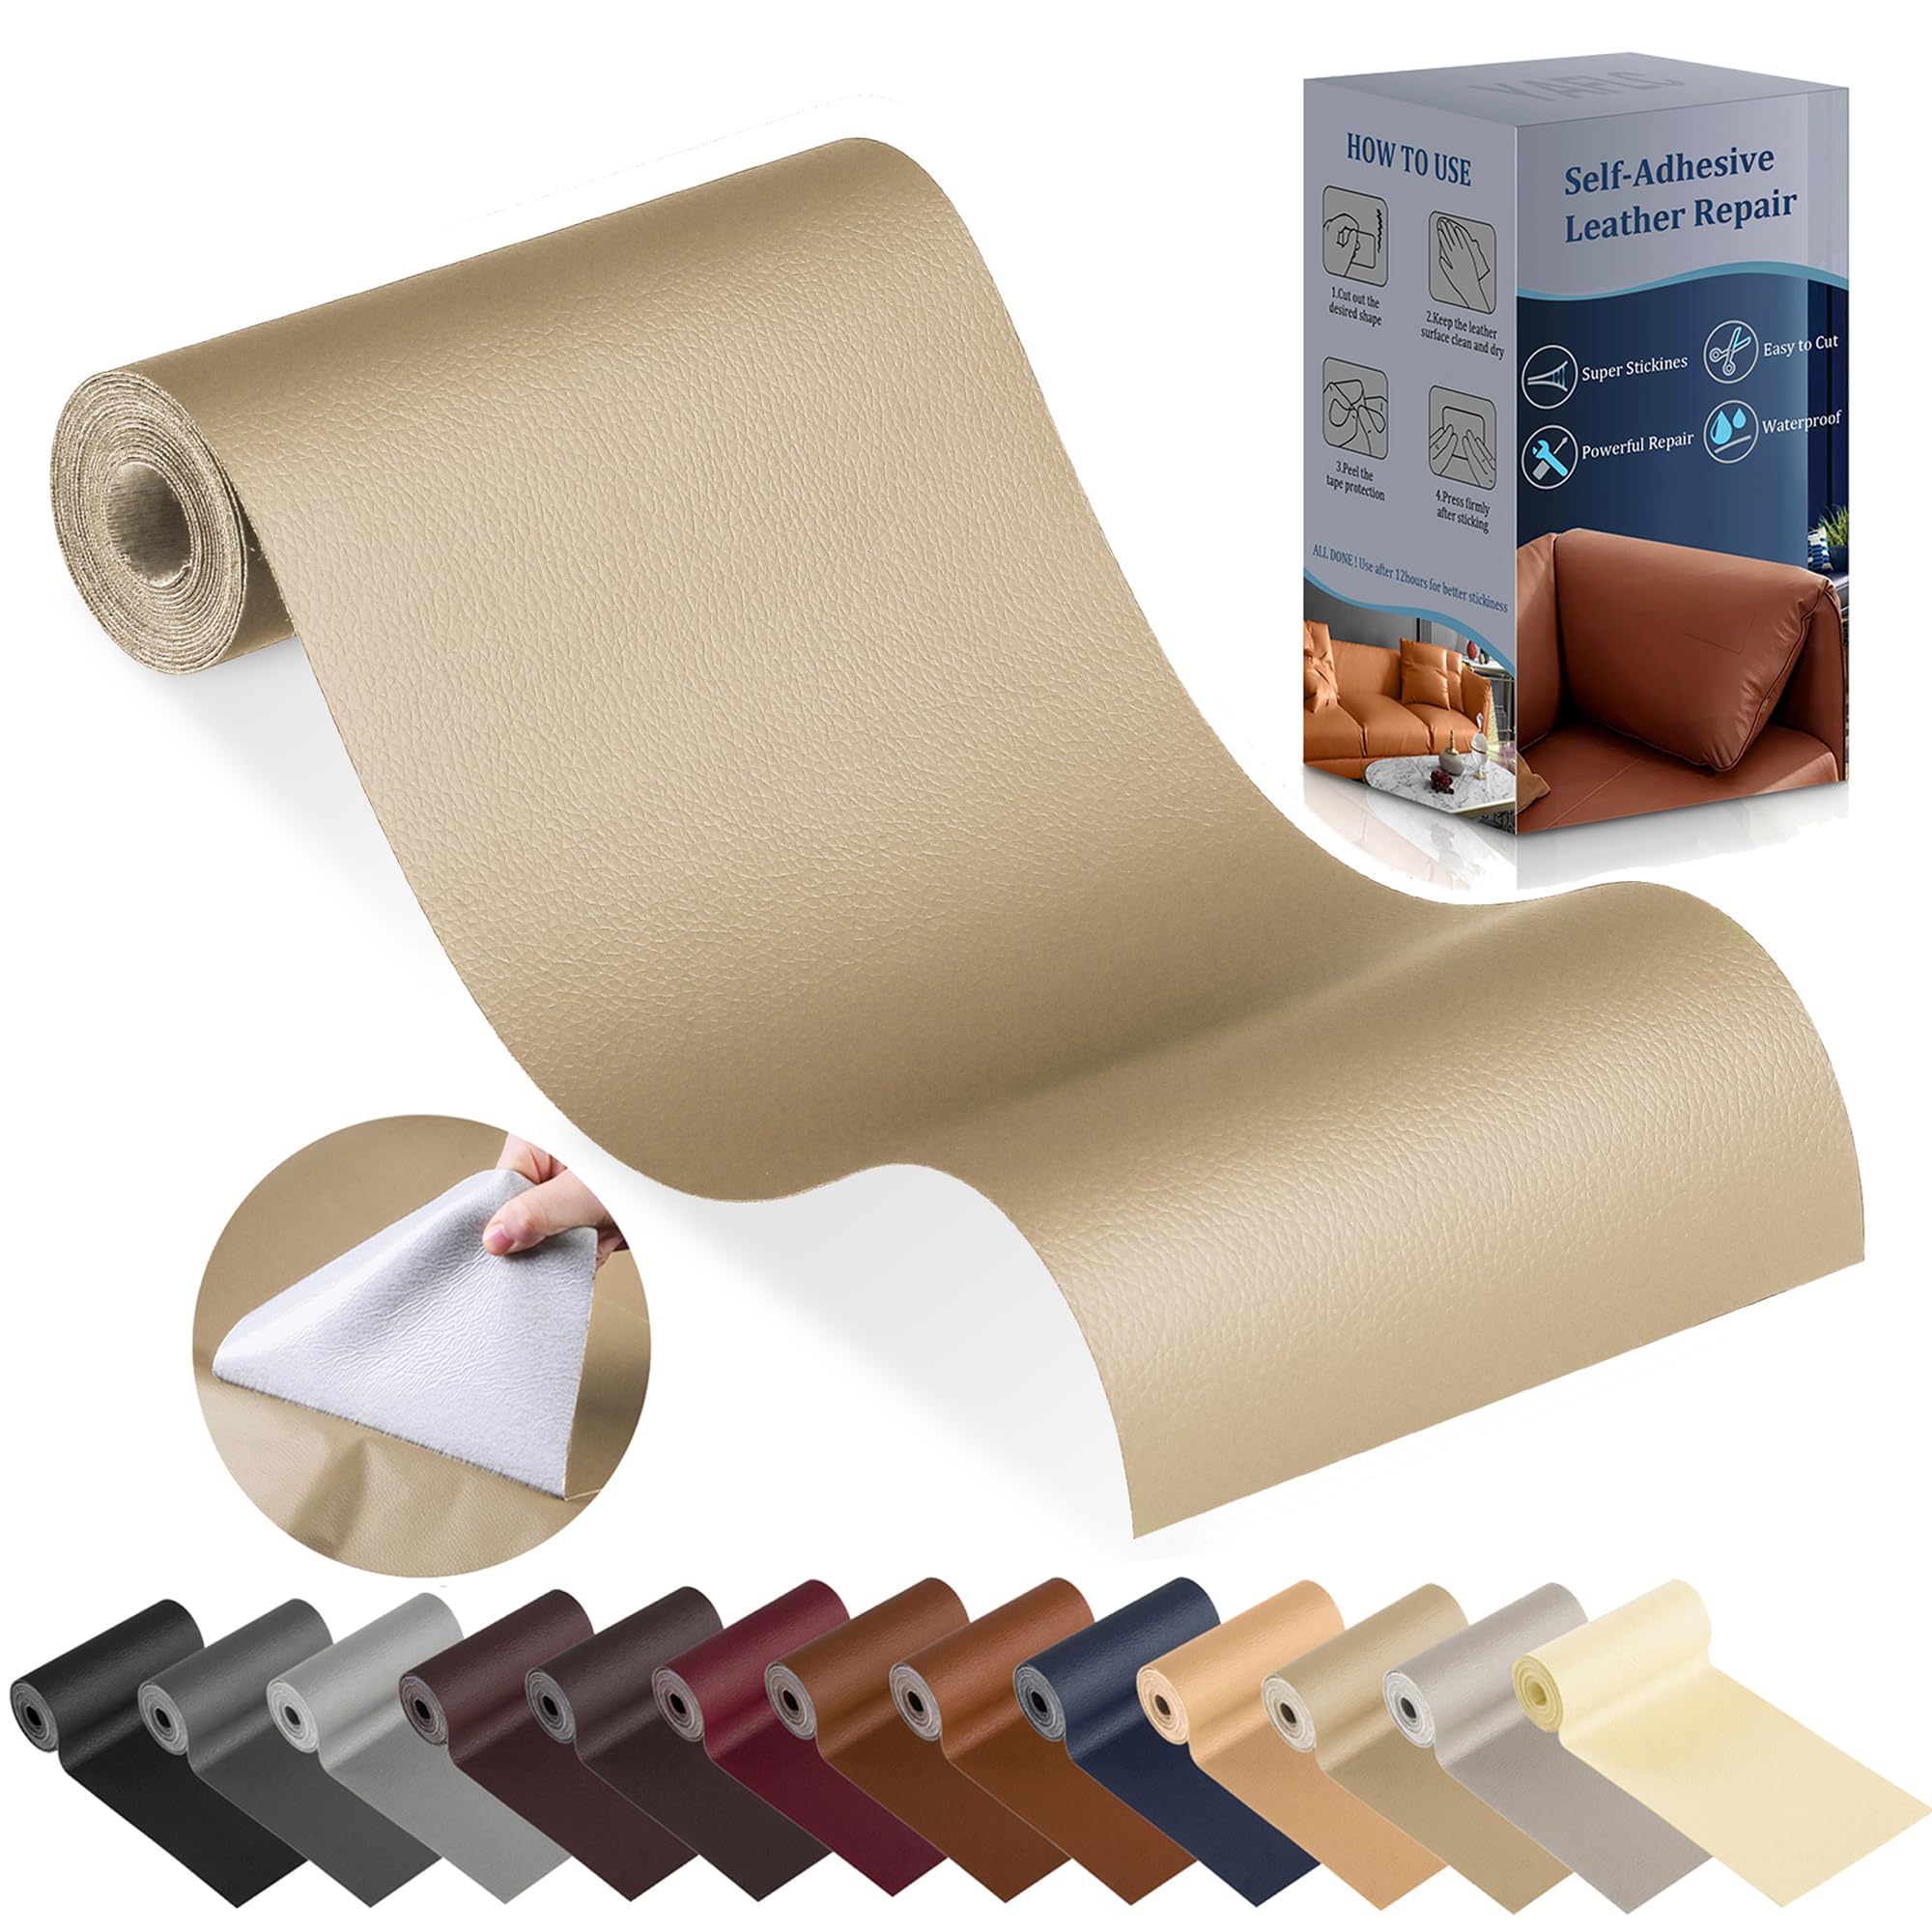 1 Roll Self-Adhesive Leather Repair Patch, Suitable For Genuine